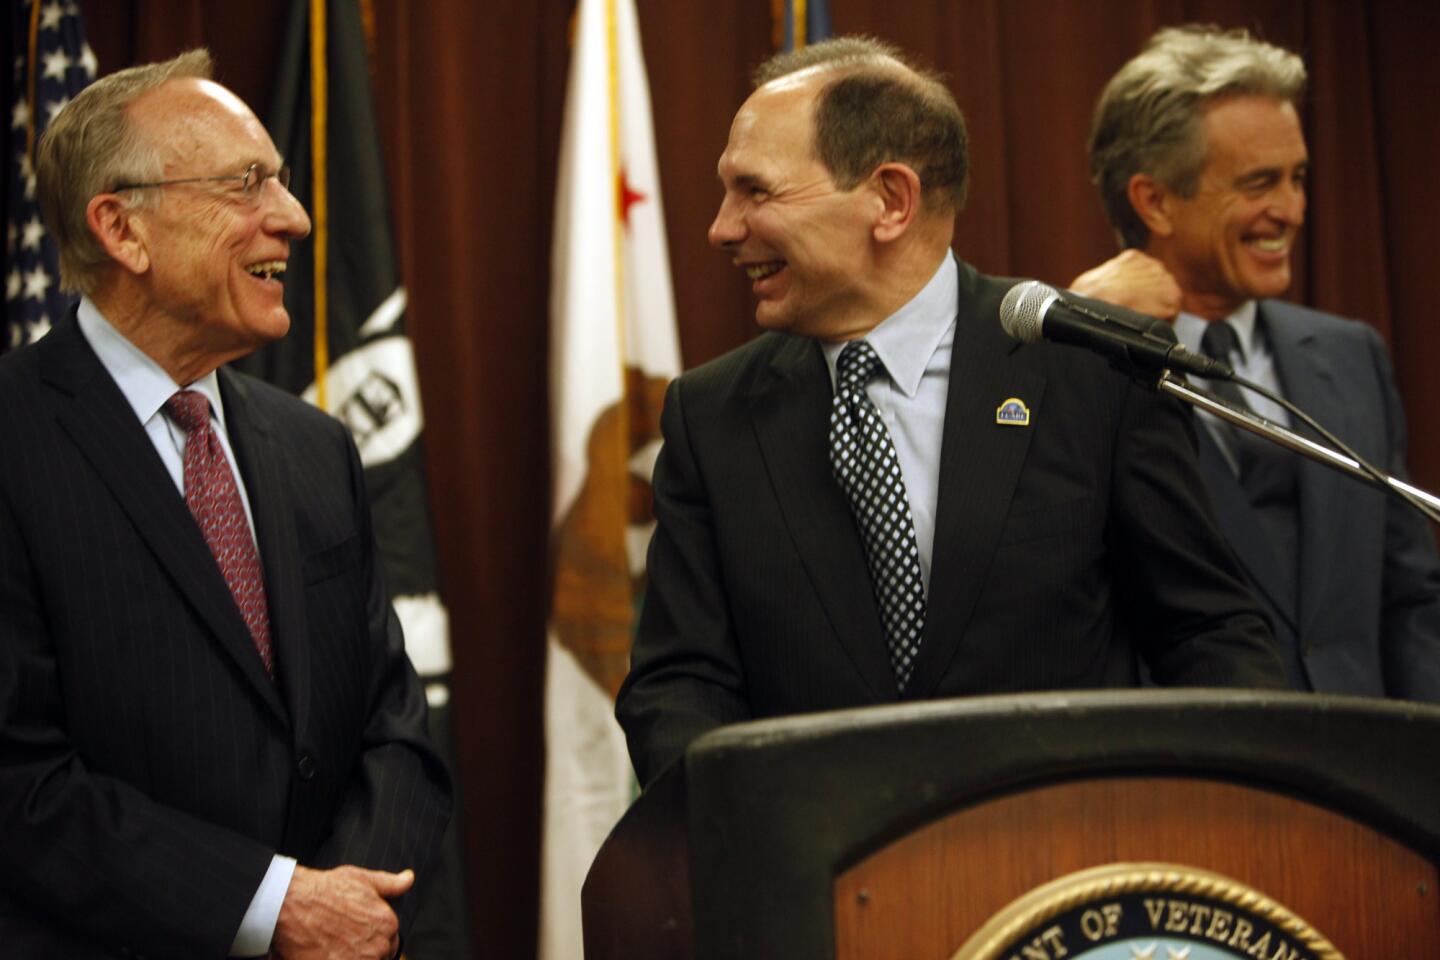 Veterans Affairs Secretary Robert A. McDonald, center, shares a light moment with attorneys Ron Olson, left, and Bobby Shriver after announcing a settlement to use the agency's sprawling West L.A. campus to help end homelessness among veterans in Los Angeles County.